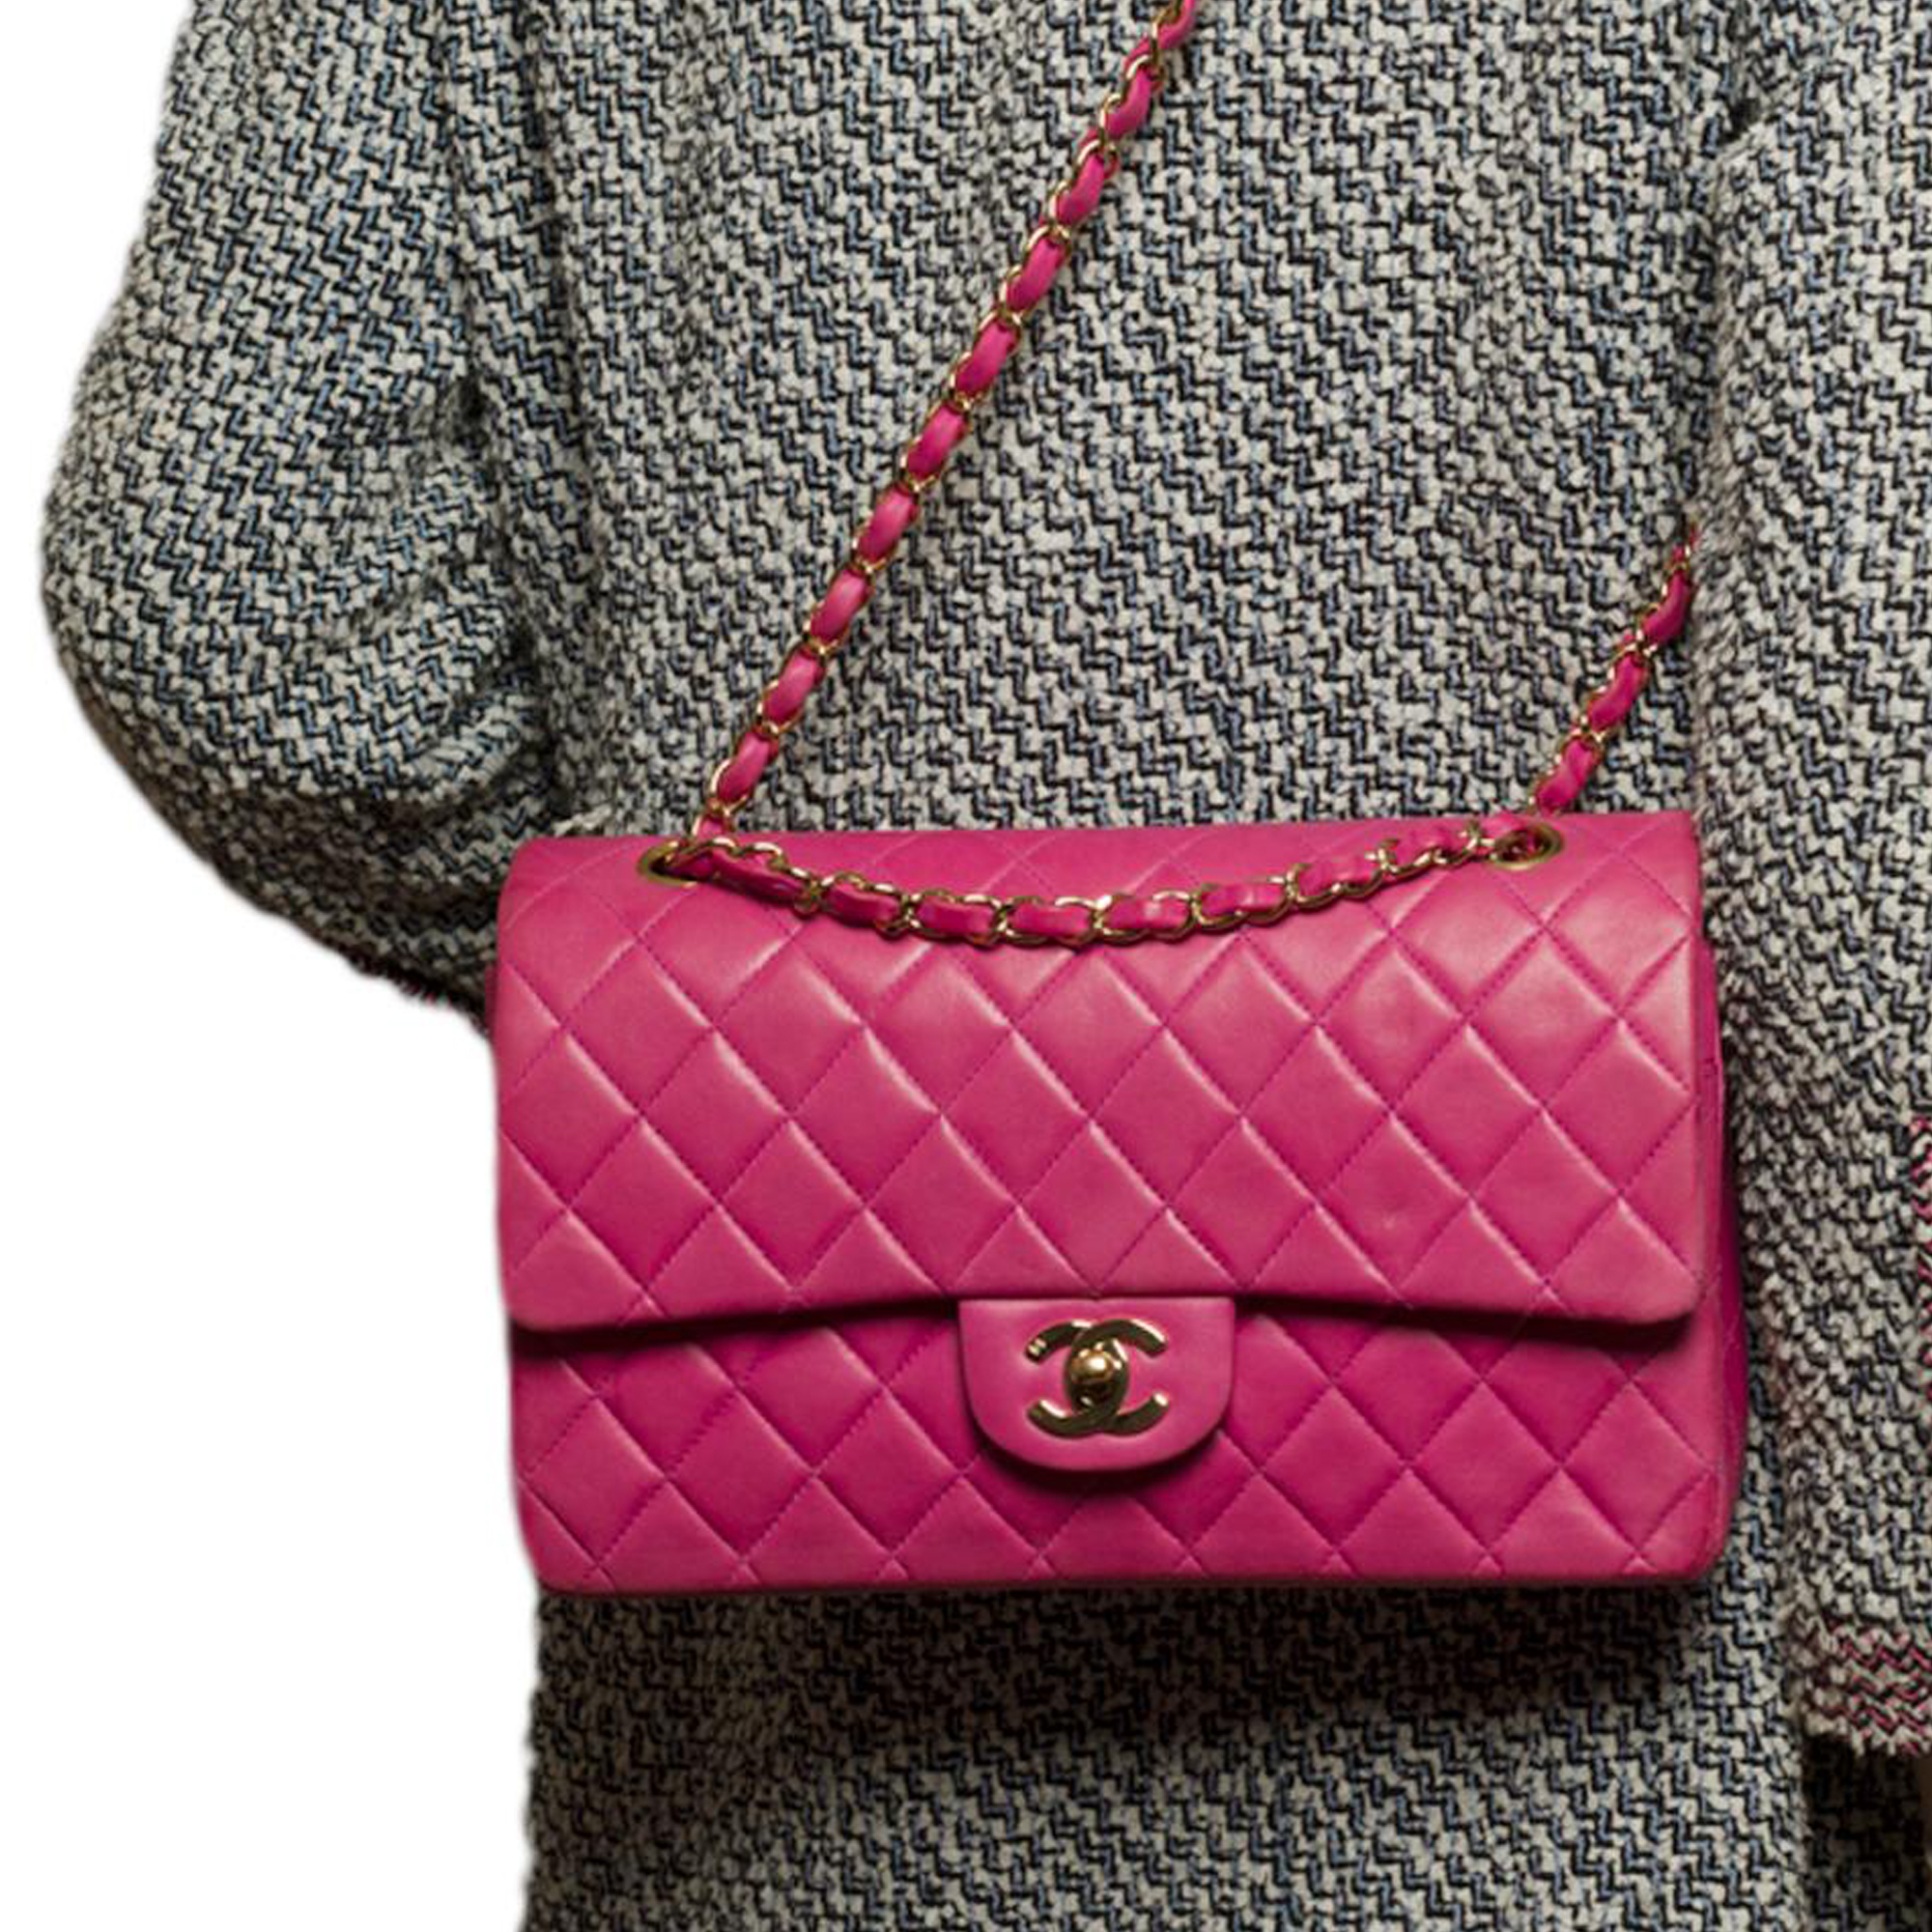 chanel pink pouch